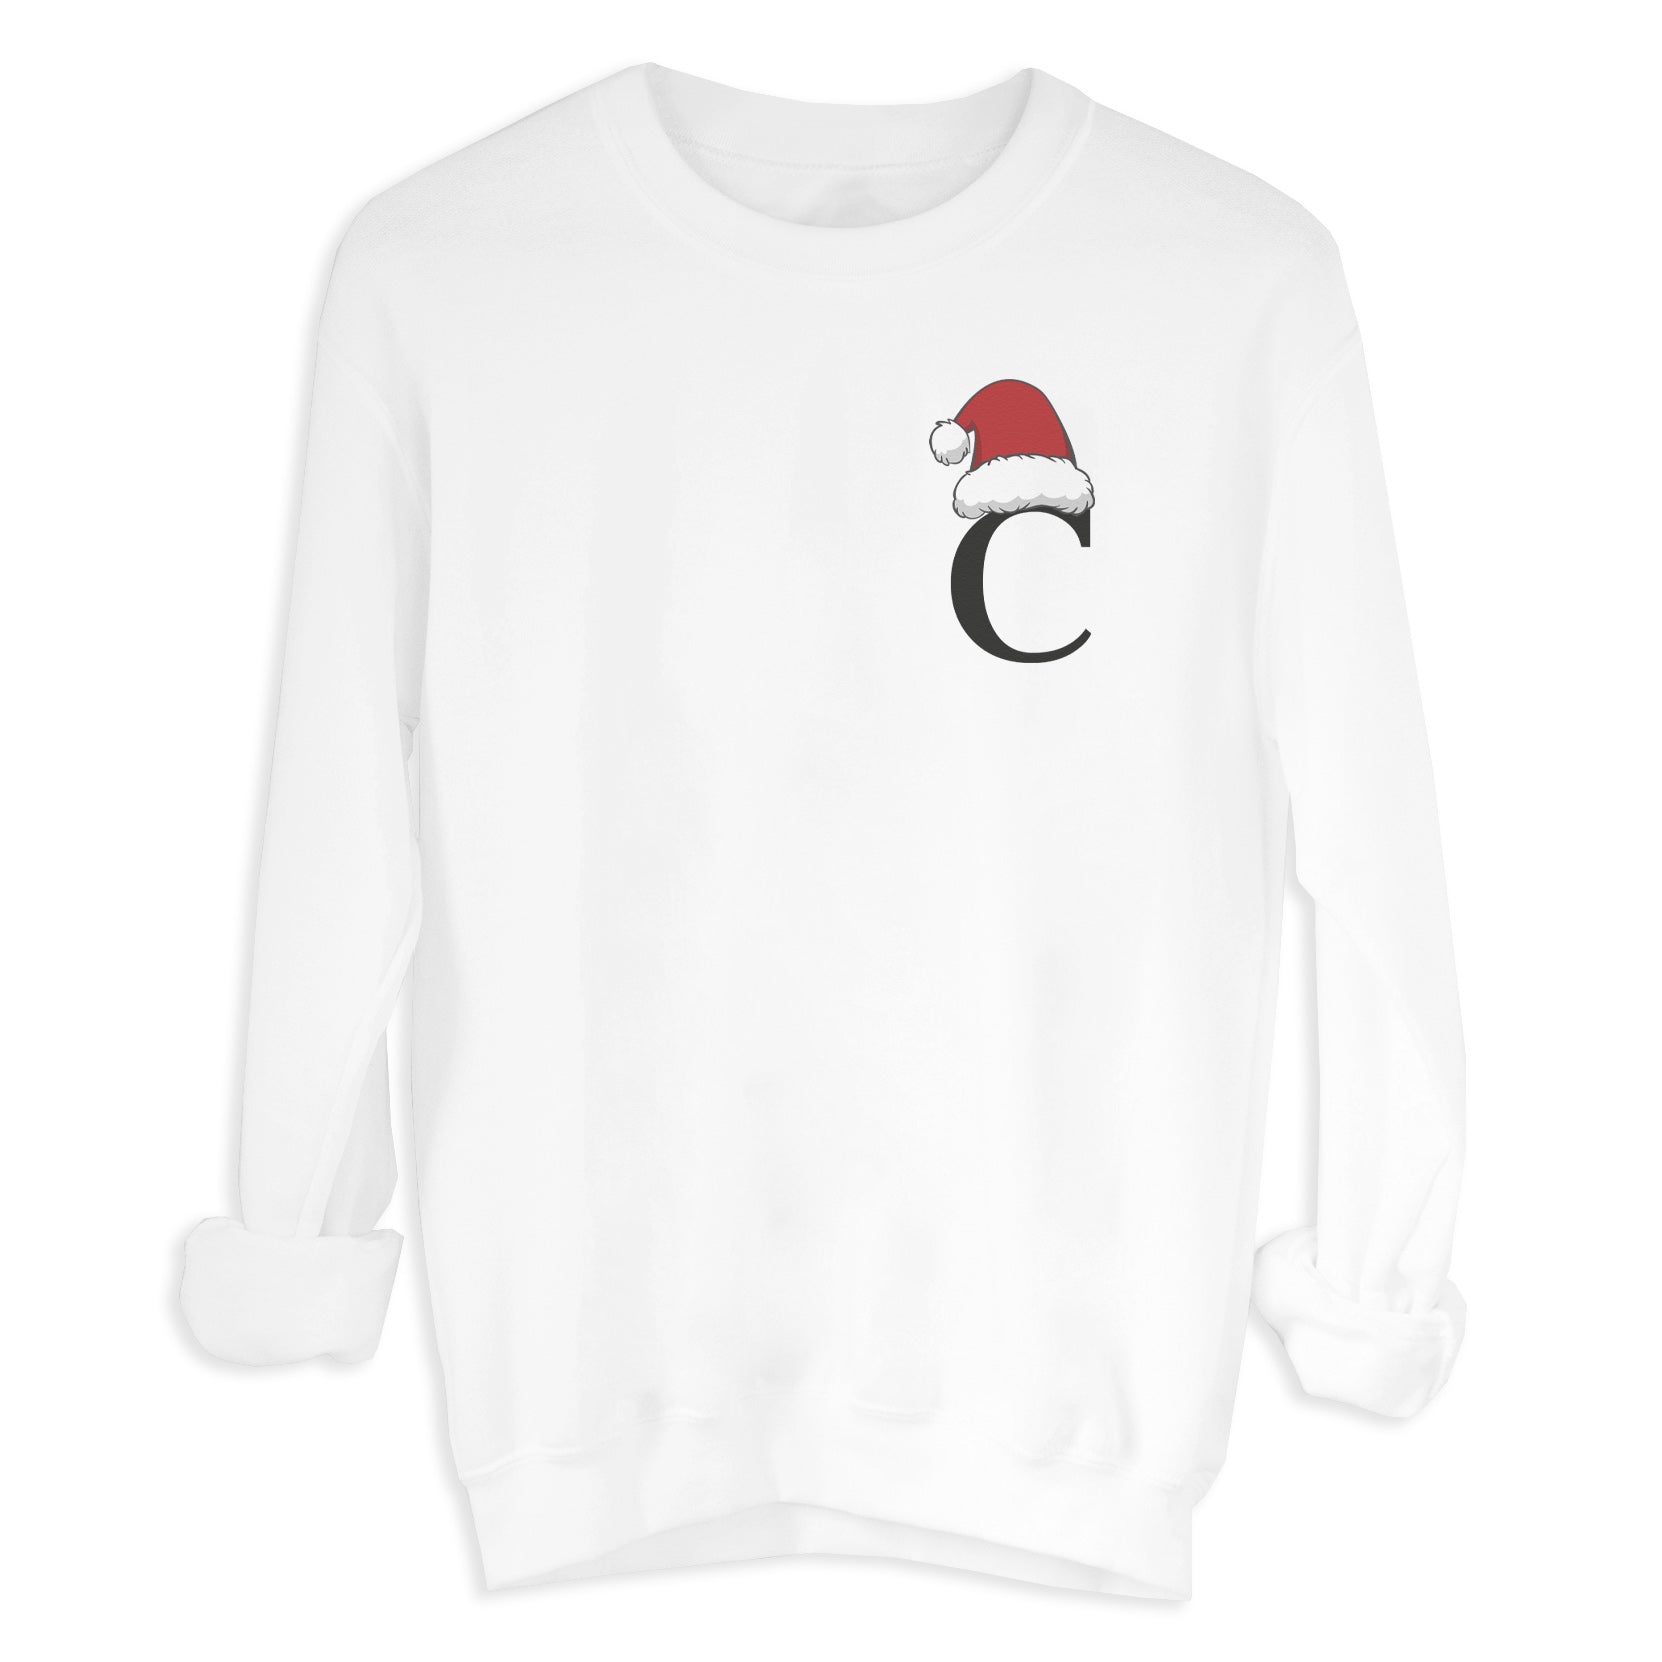 PERSONALISED Initial Christmas Sweater - Christmas Jumper Sweatshirt - All Sizes